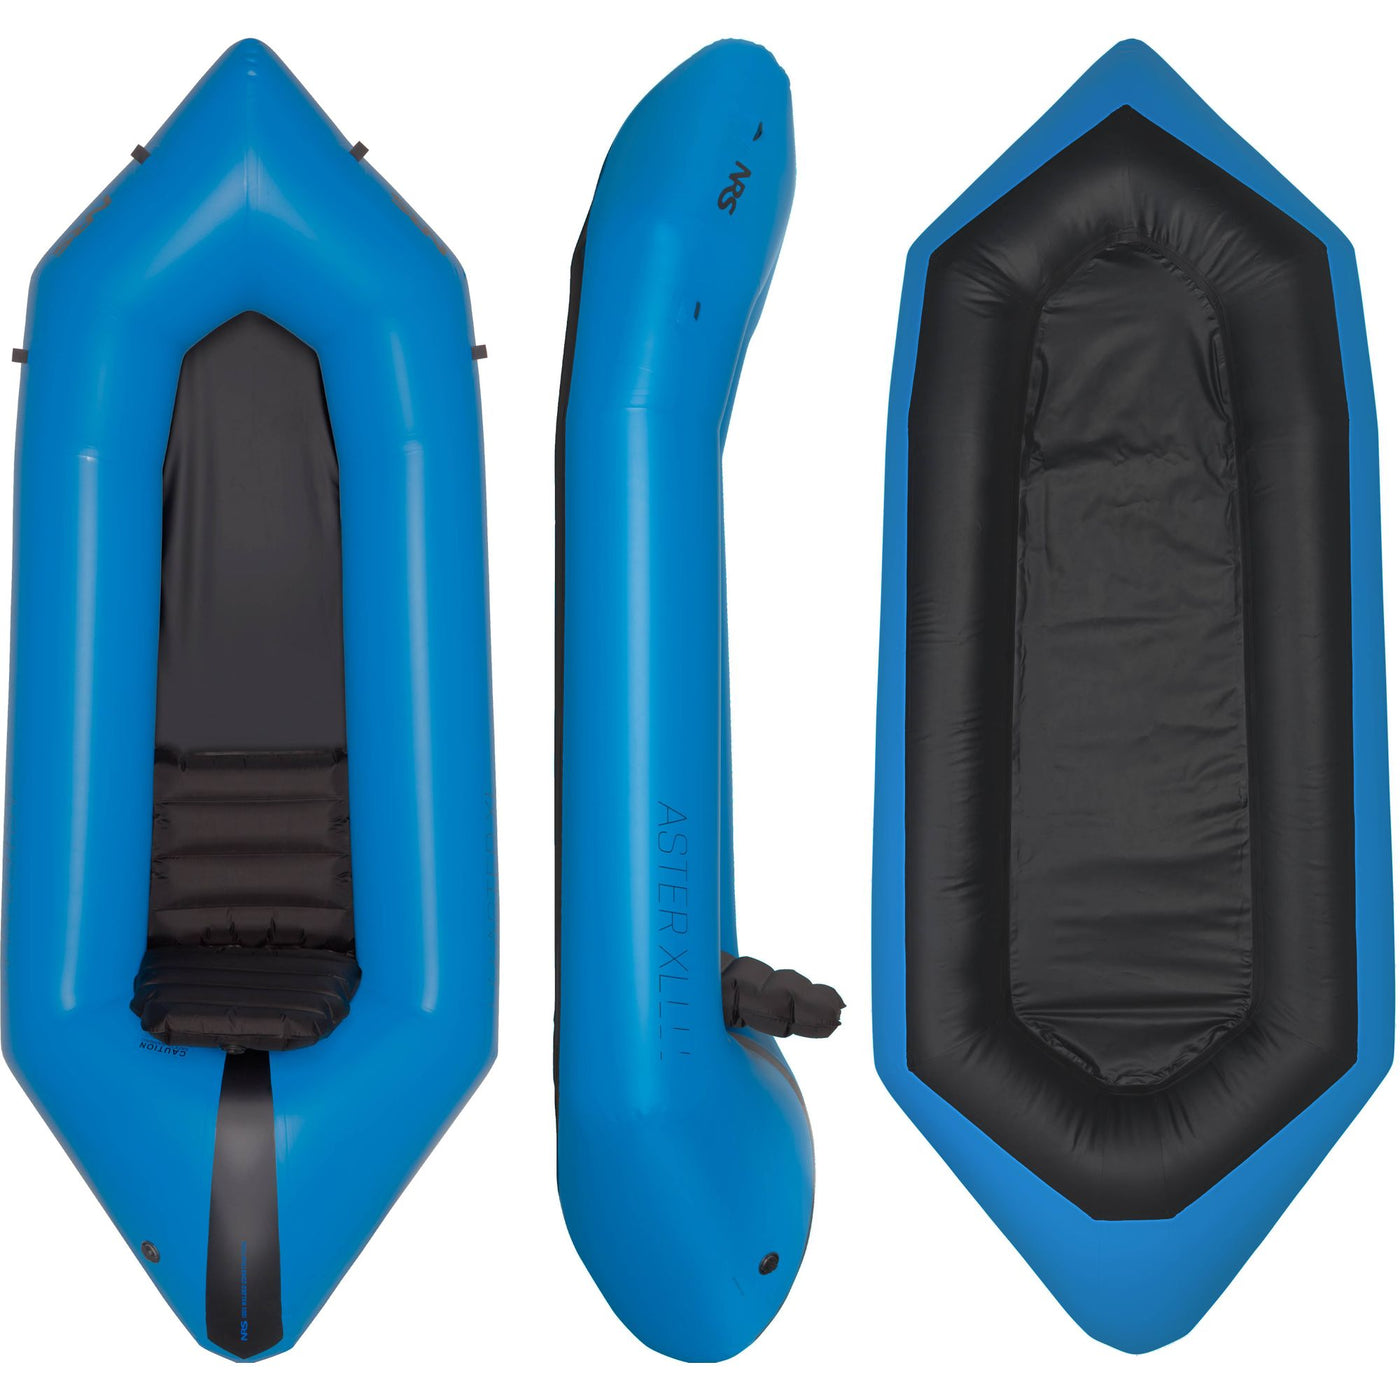 NRS Aster Packraft